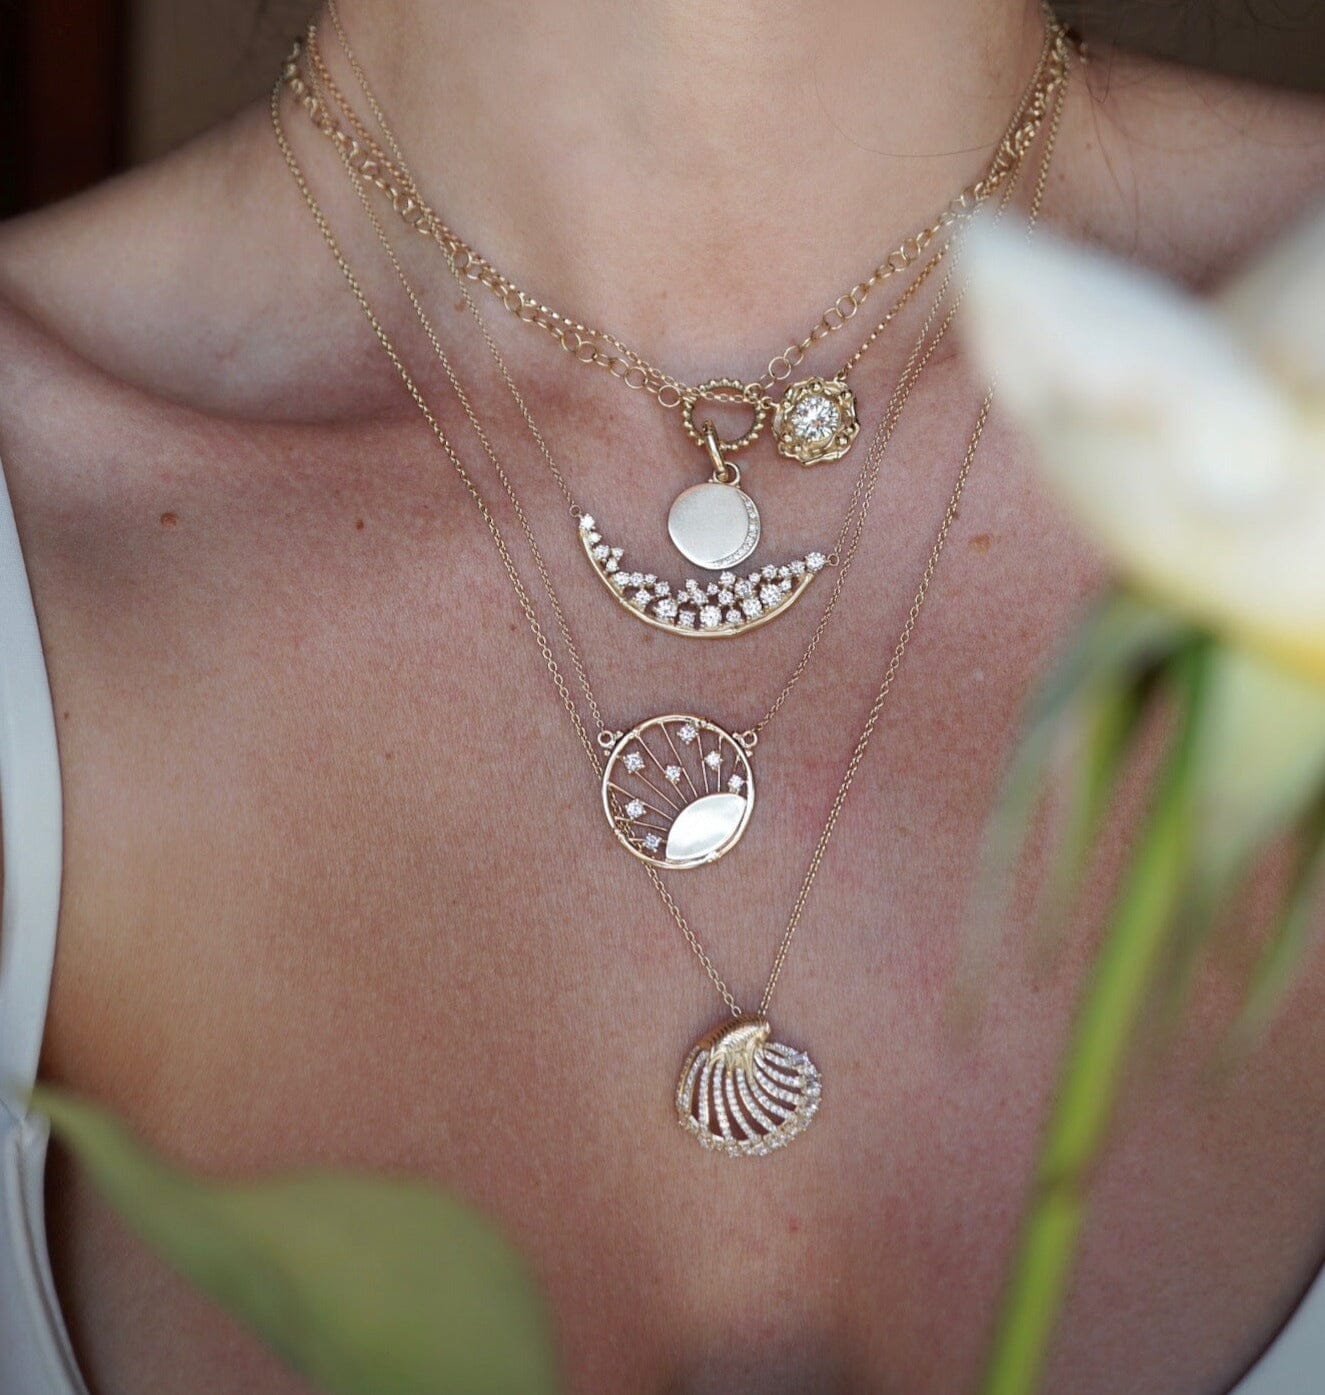 Nikki's Perfect Layer Necklaces Bundle Bayou with Love 